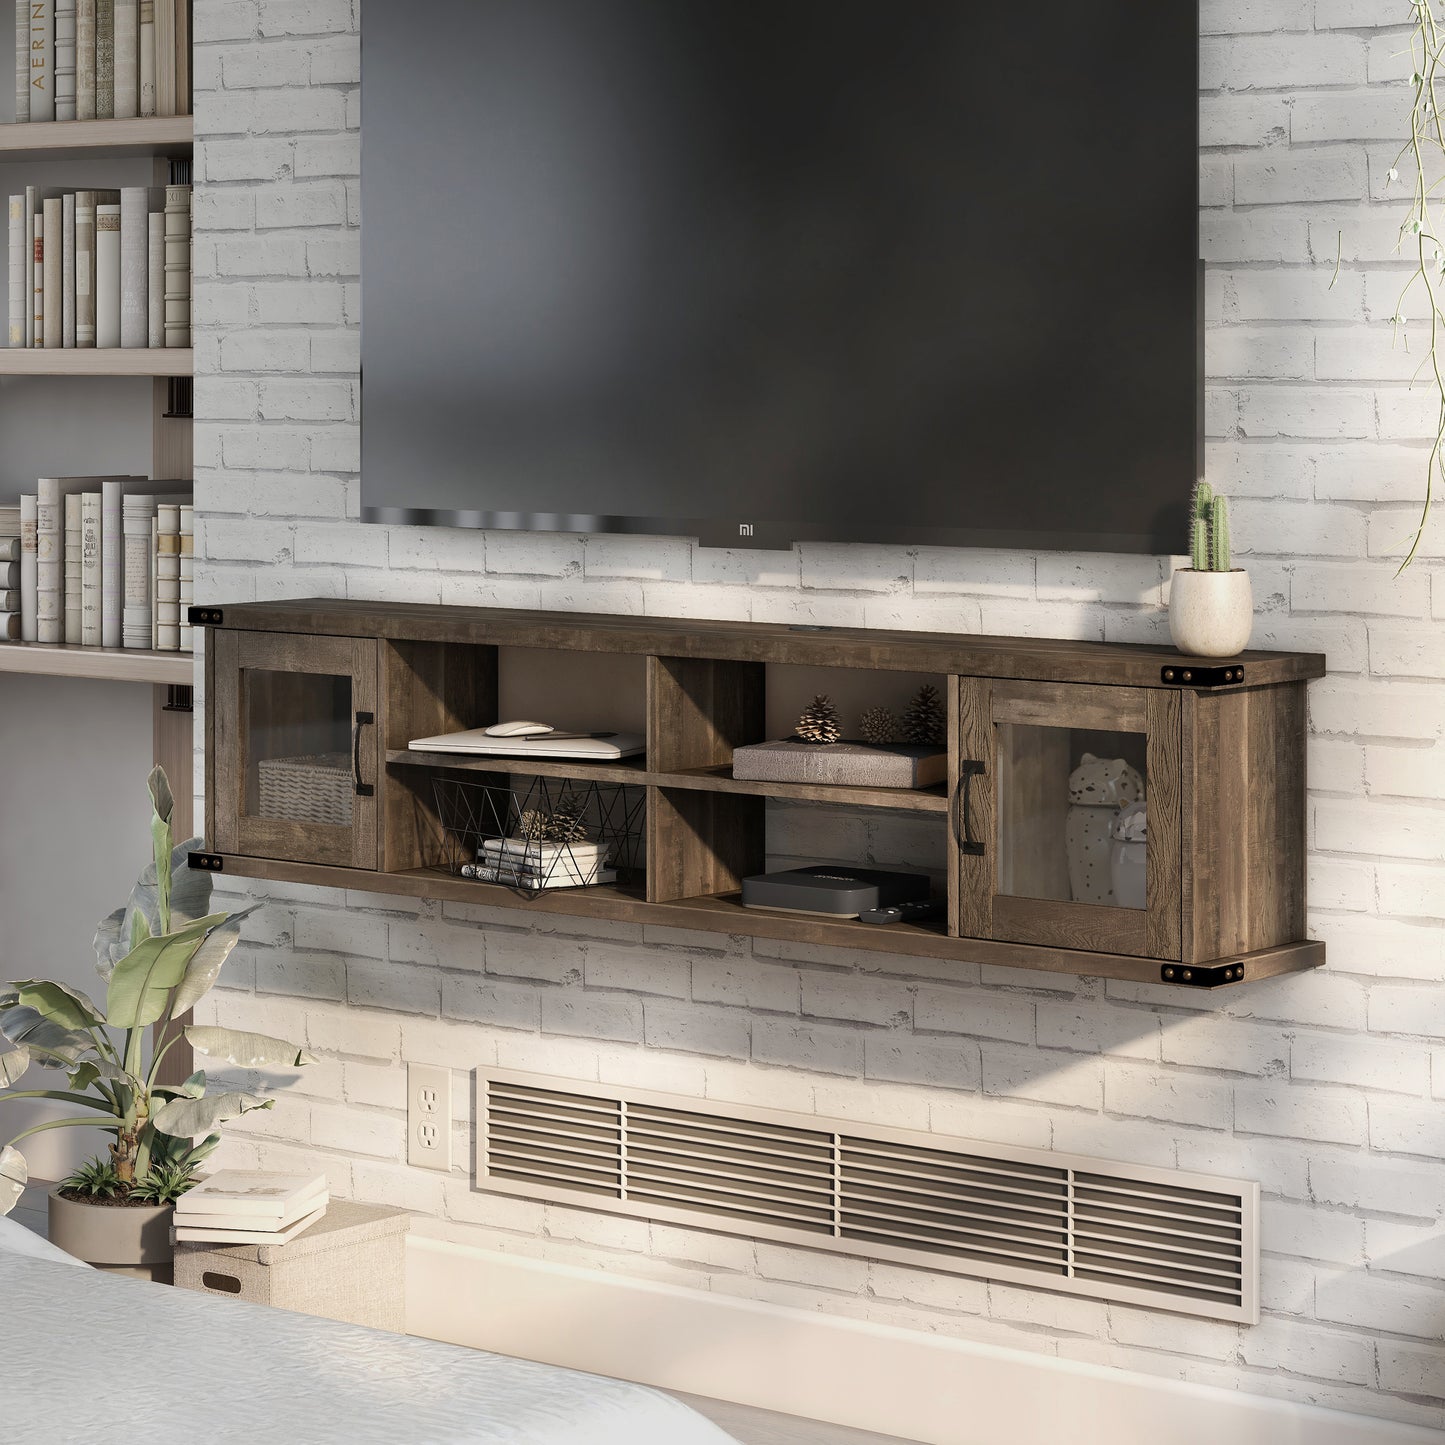 Left angled modern reclaimed oak four-shelf wall mountable TV stand with glass doors in a living room with accessories